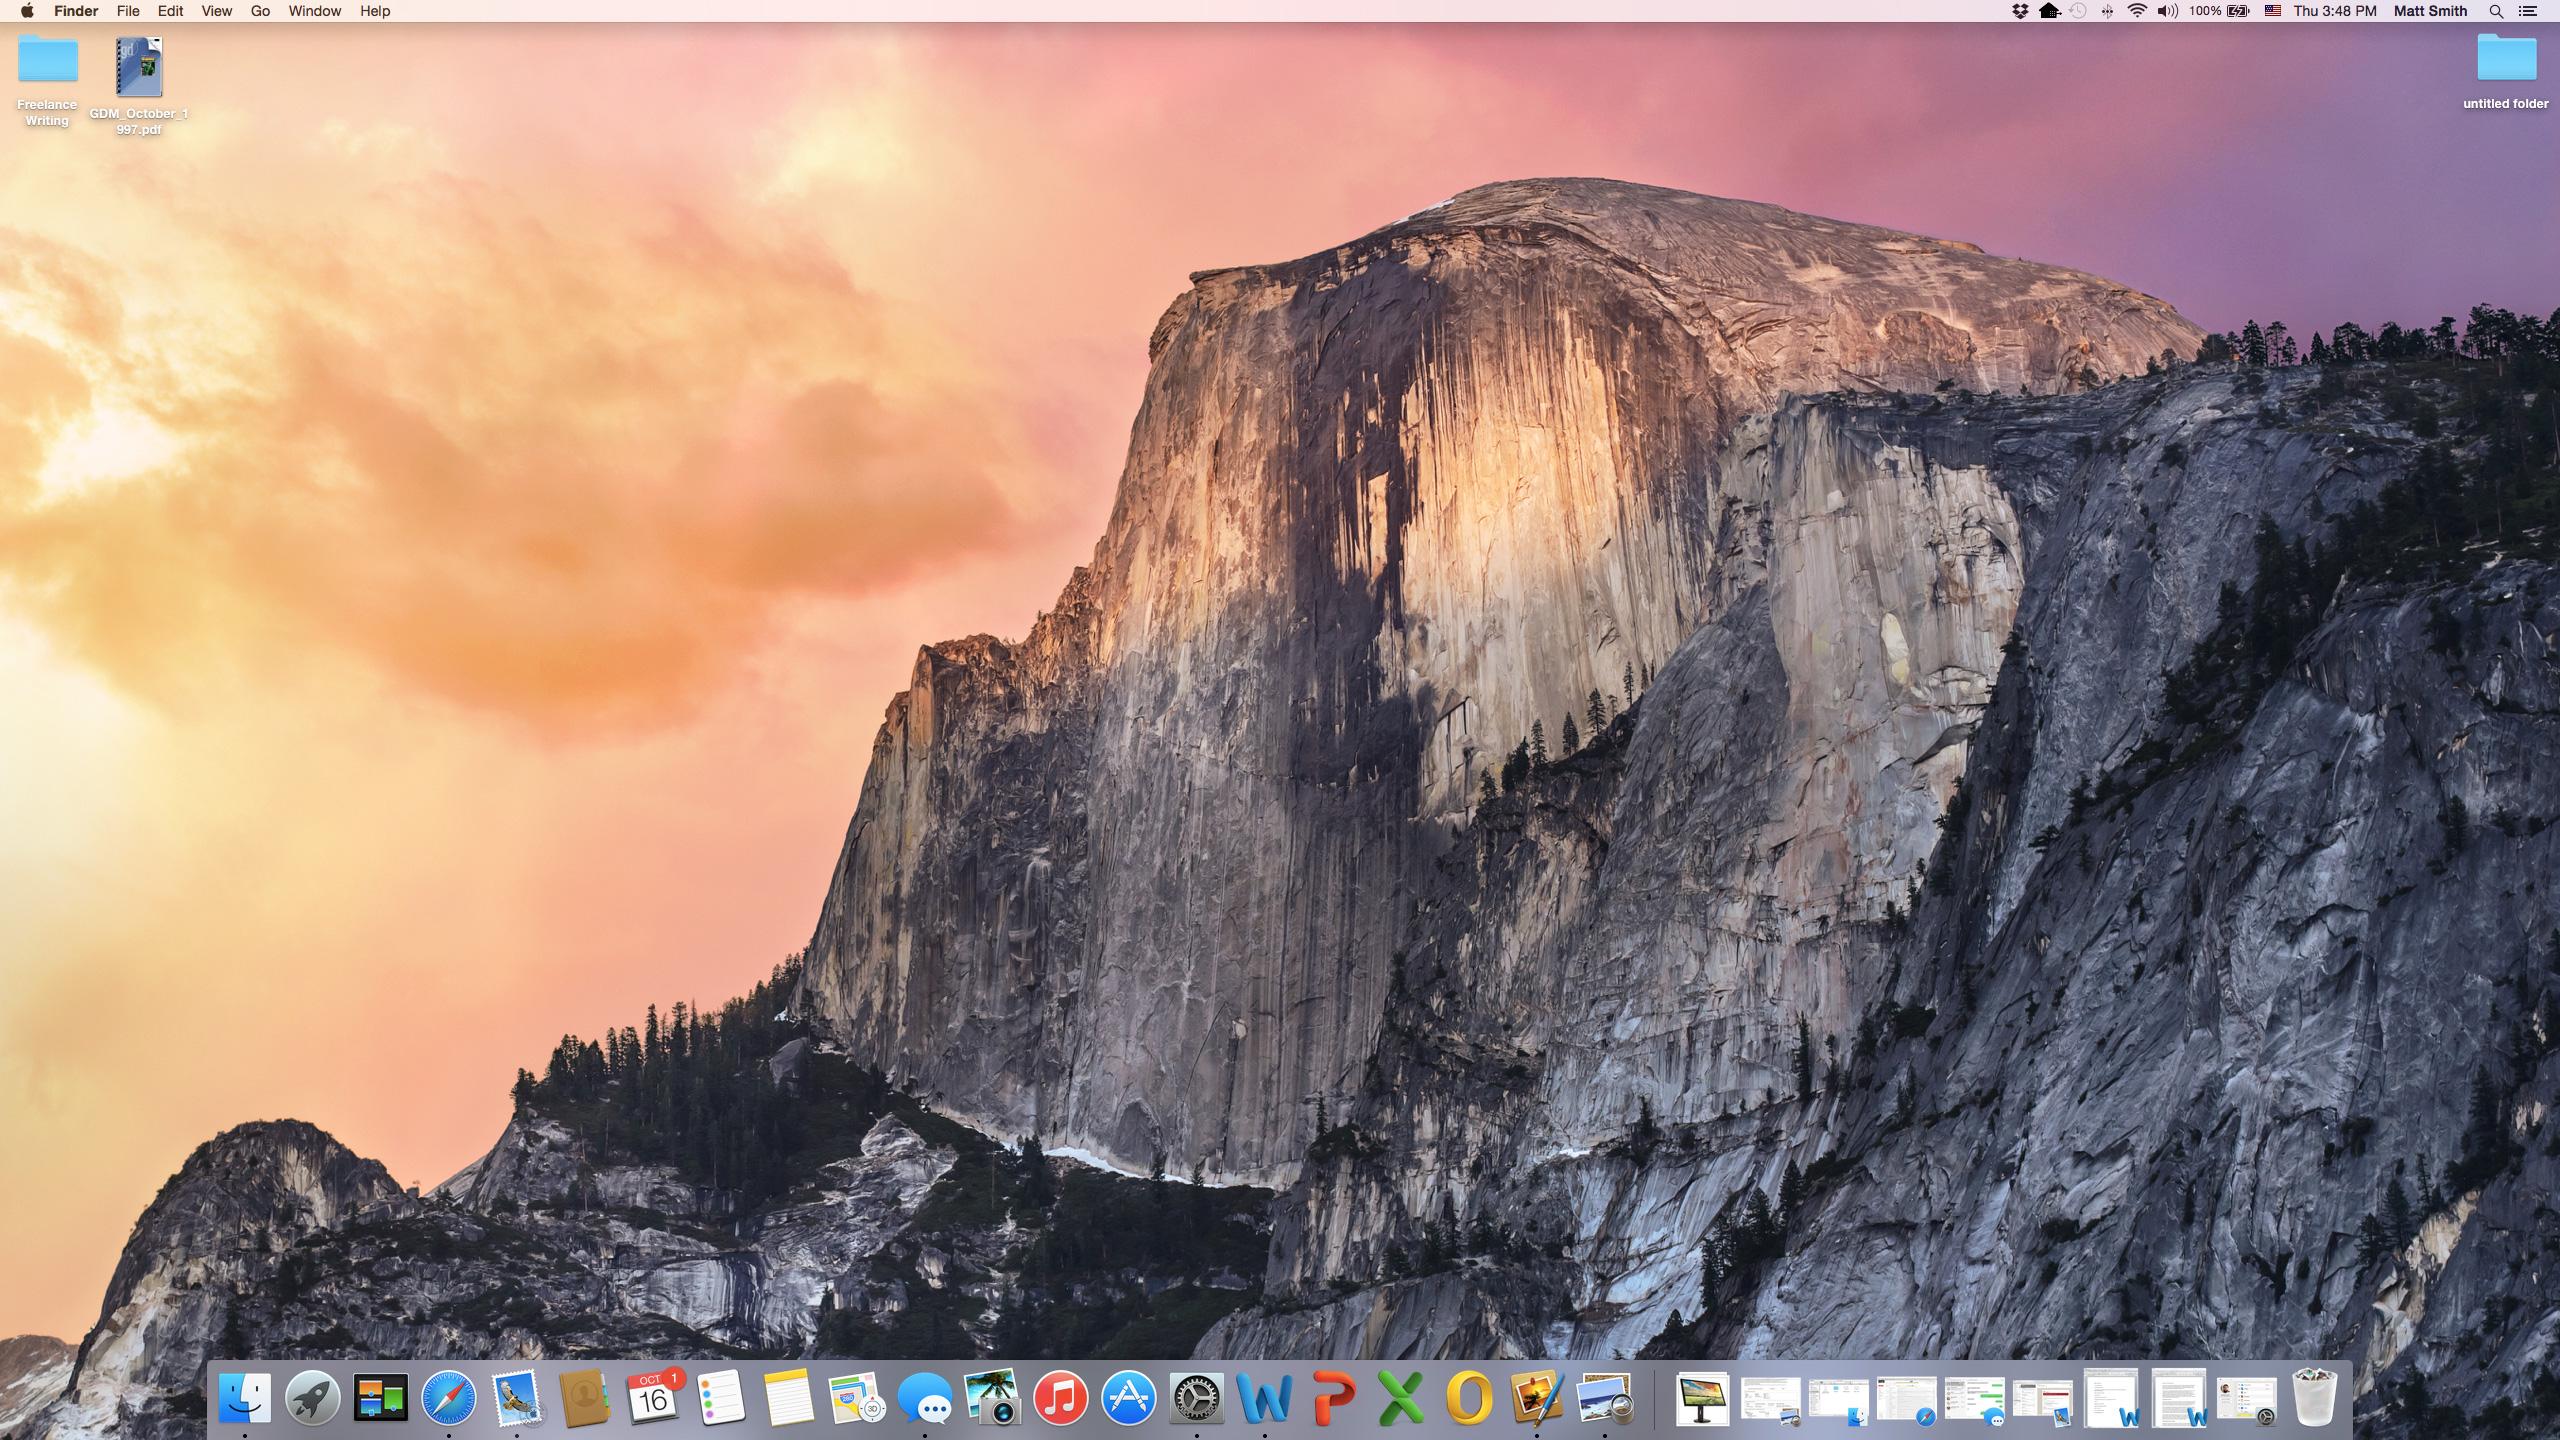 Apple's OS X Yosemite Mac operating system, with the desktop and several icons visible.